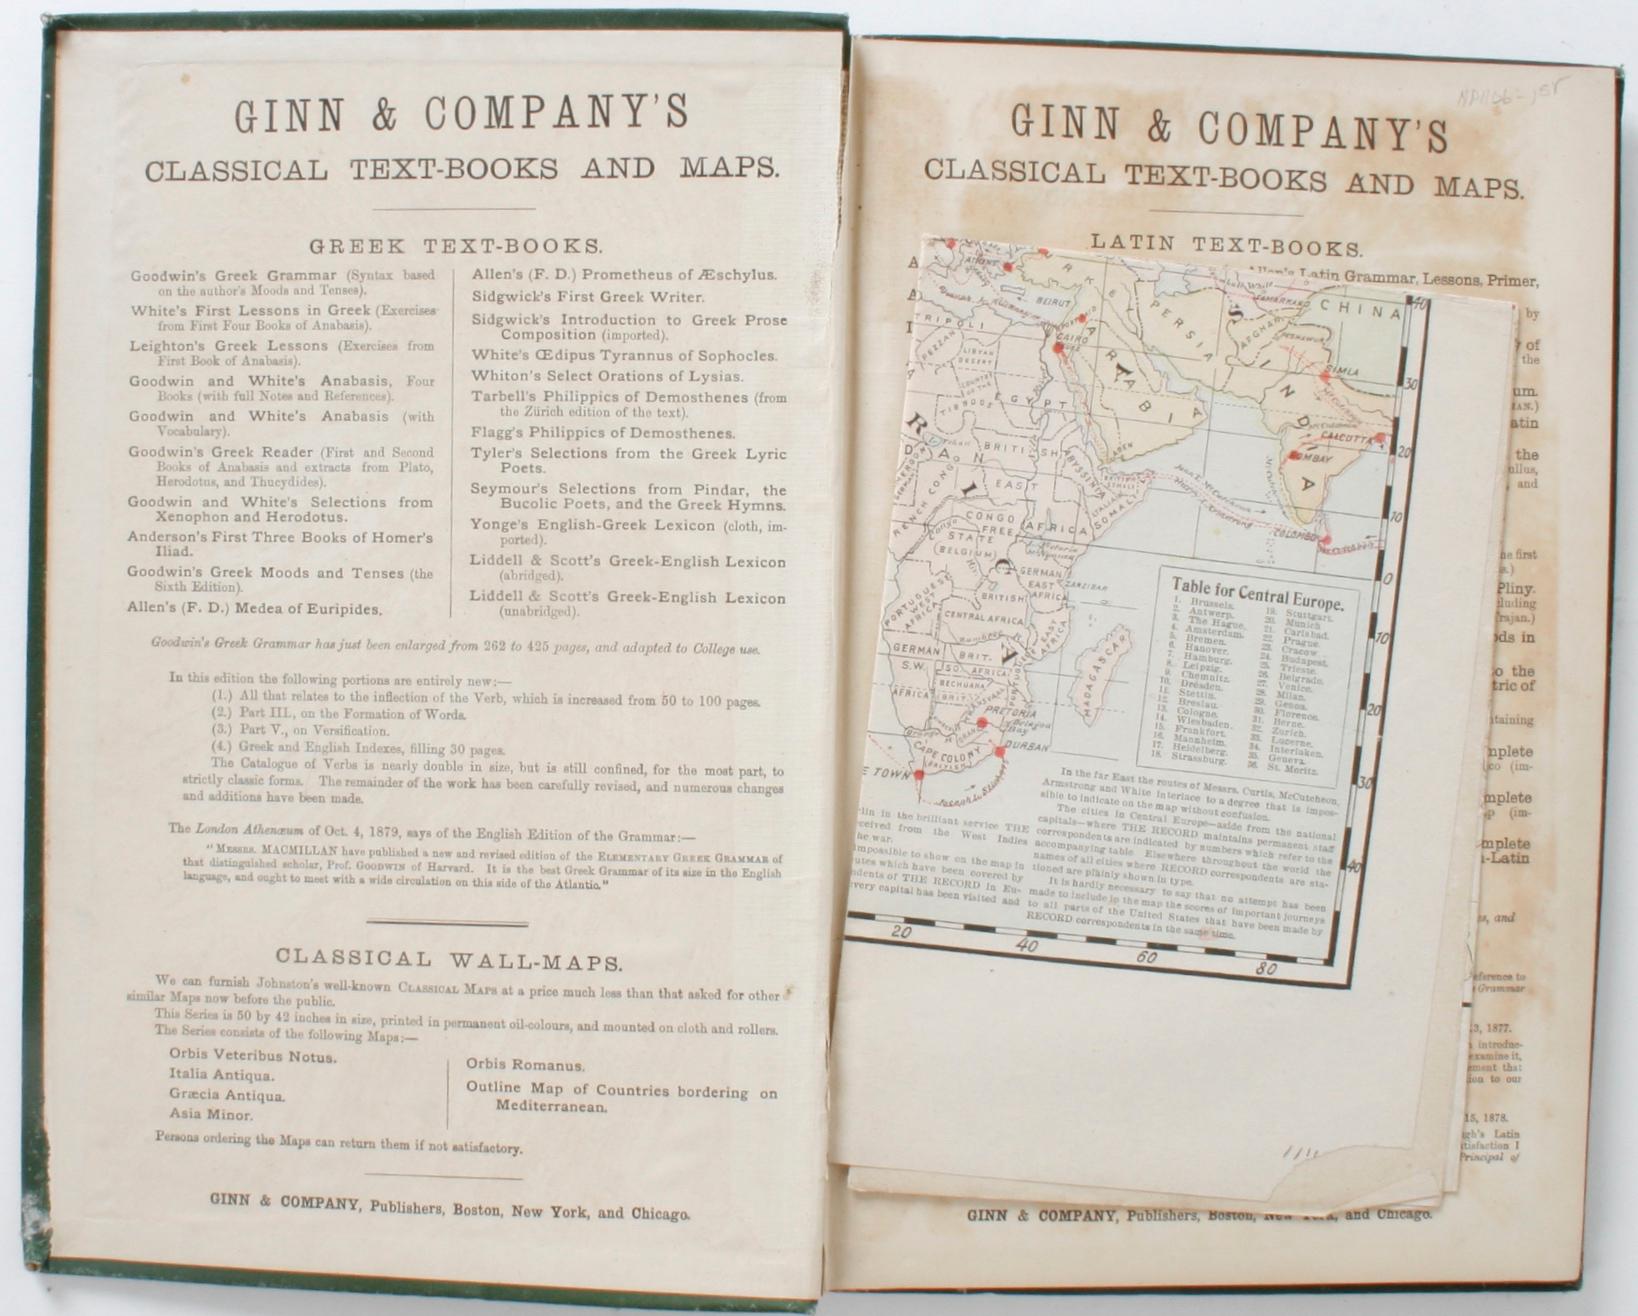 Ginn & Company's Classical Atlas by Ginn & Company. Ginn & Company Publishers, Boston, NY, Chicago, 1886. First edition hardcover no dust jacket as published. Original adobe cloth with beautifully stamped boards, with black and gilt on the front